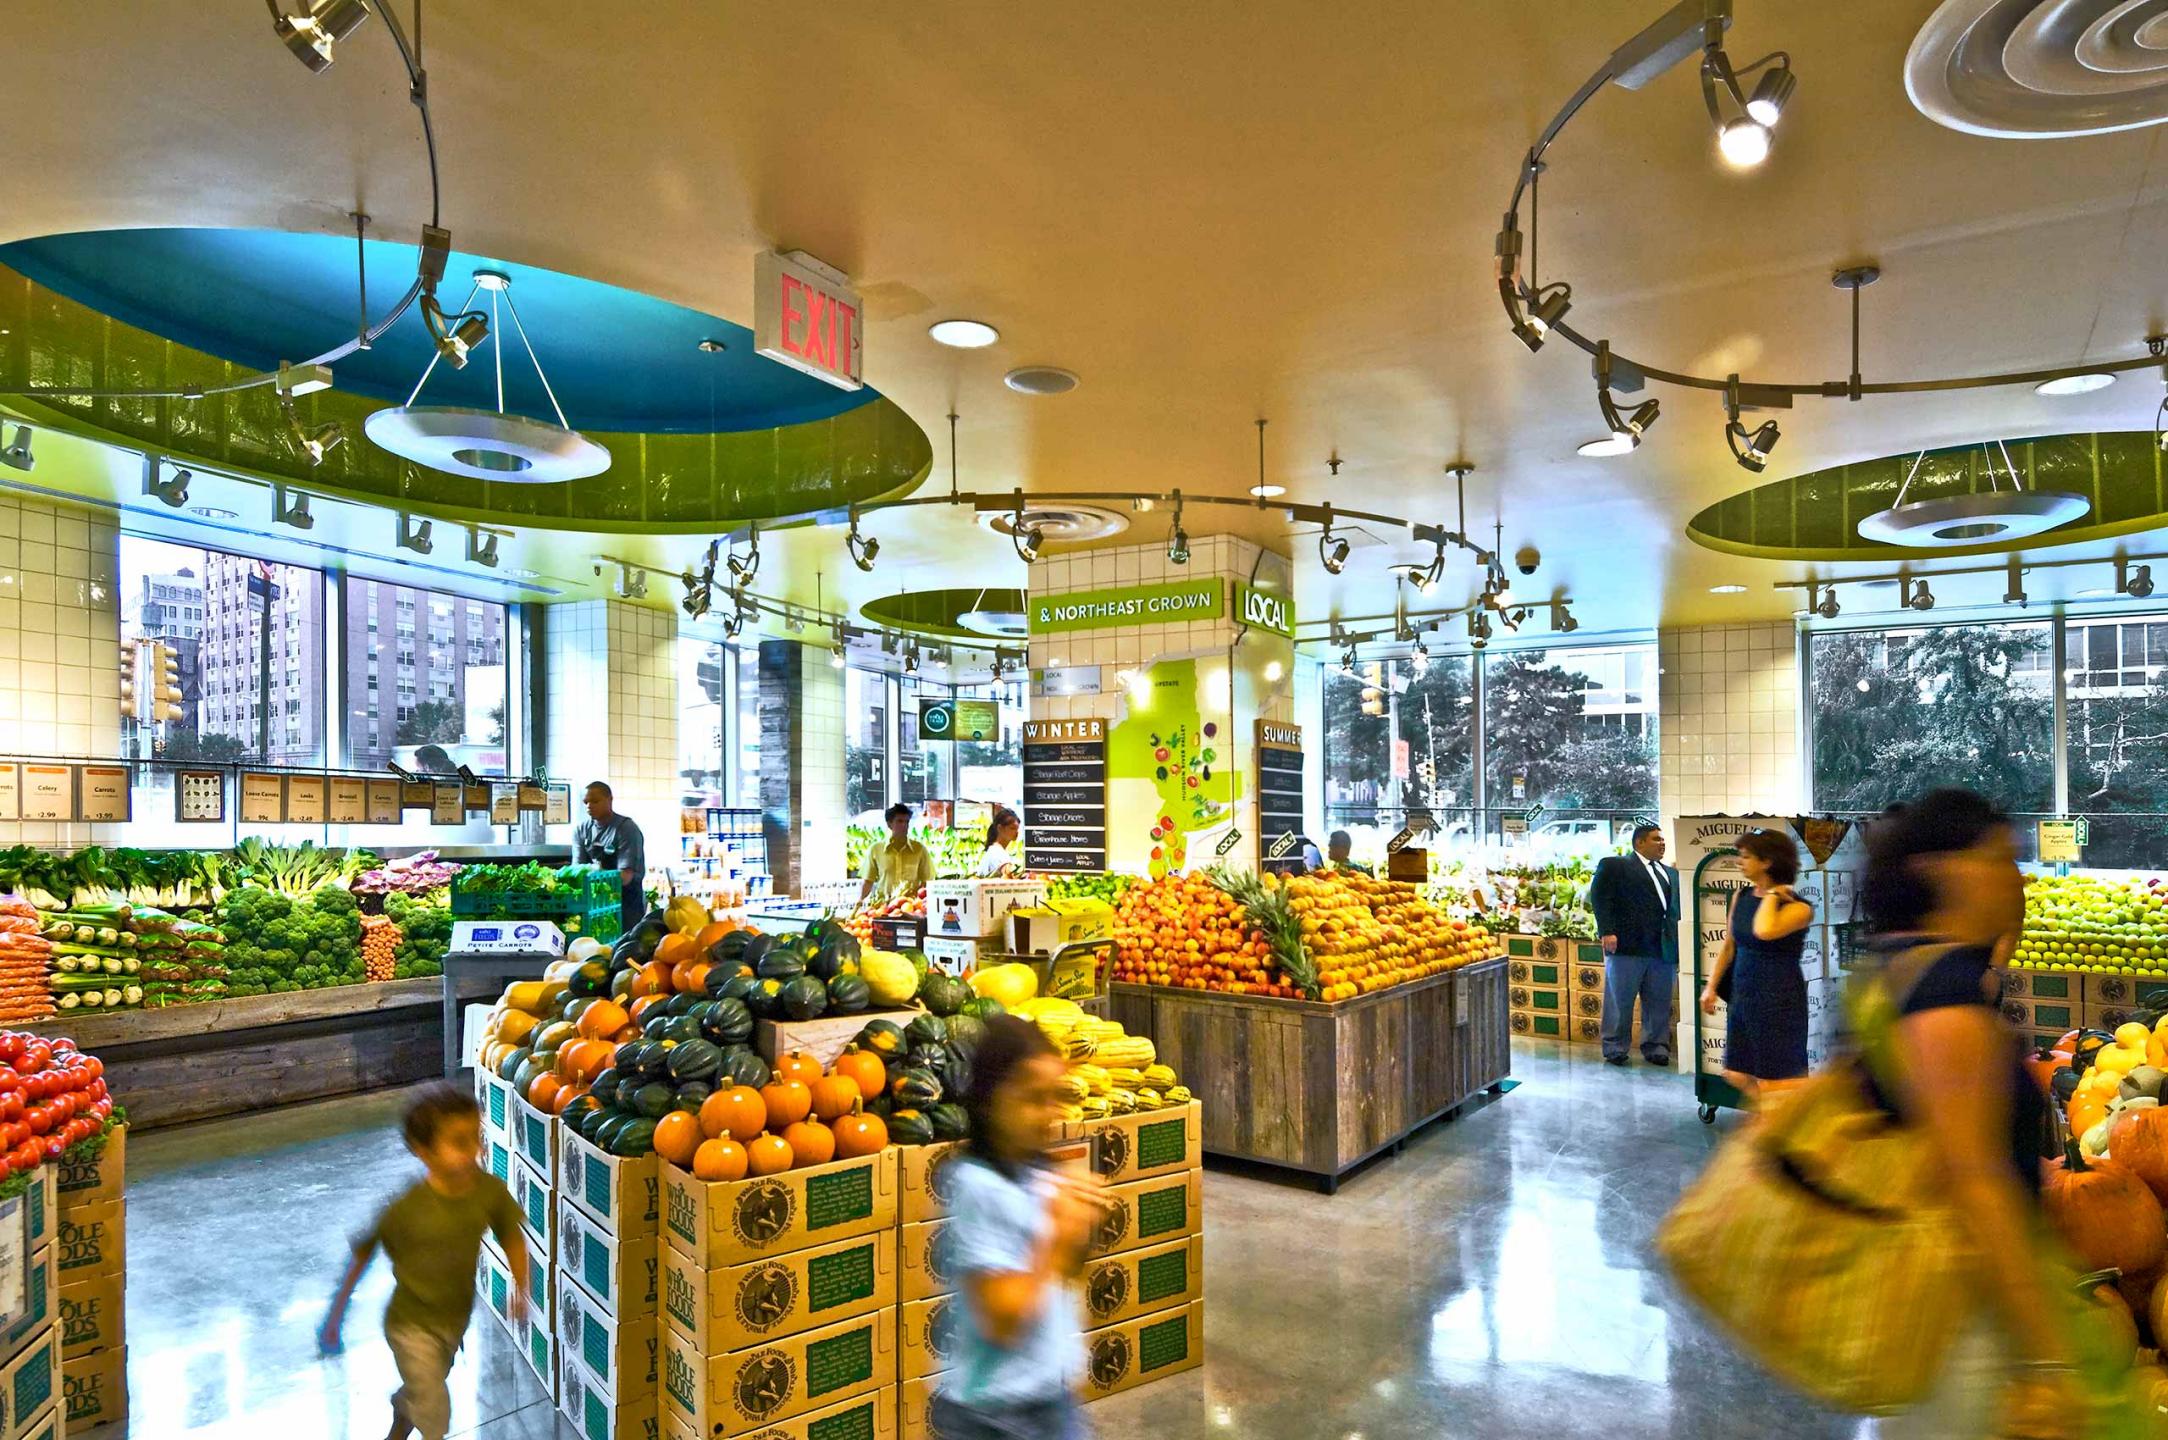 Whole Foods Market located on Houston St., NYC with interior design by SBLM in NYC and Bottinogrund in Austin, Texas. Client requested wide view and to have people interacting in the space. : Whole Foods Market : New York NY Architectural Photographer | Interior and Exterior